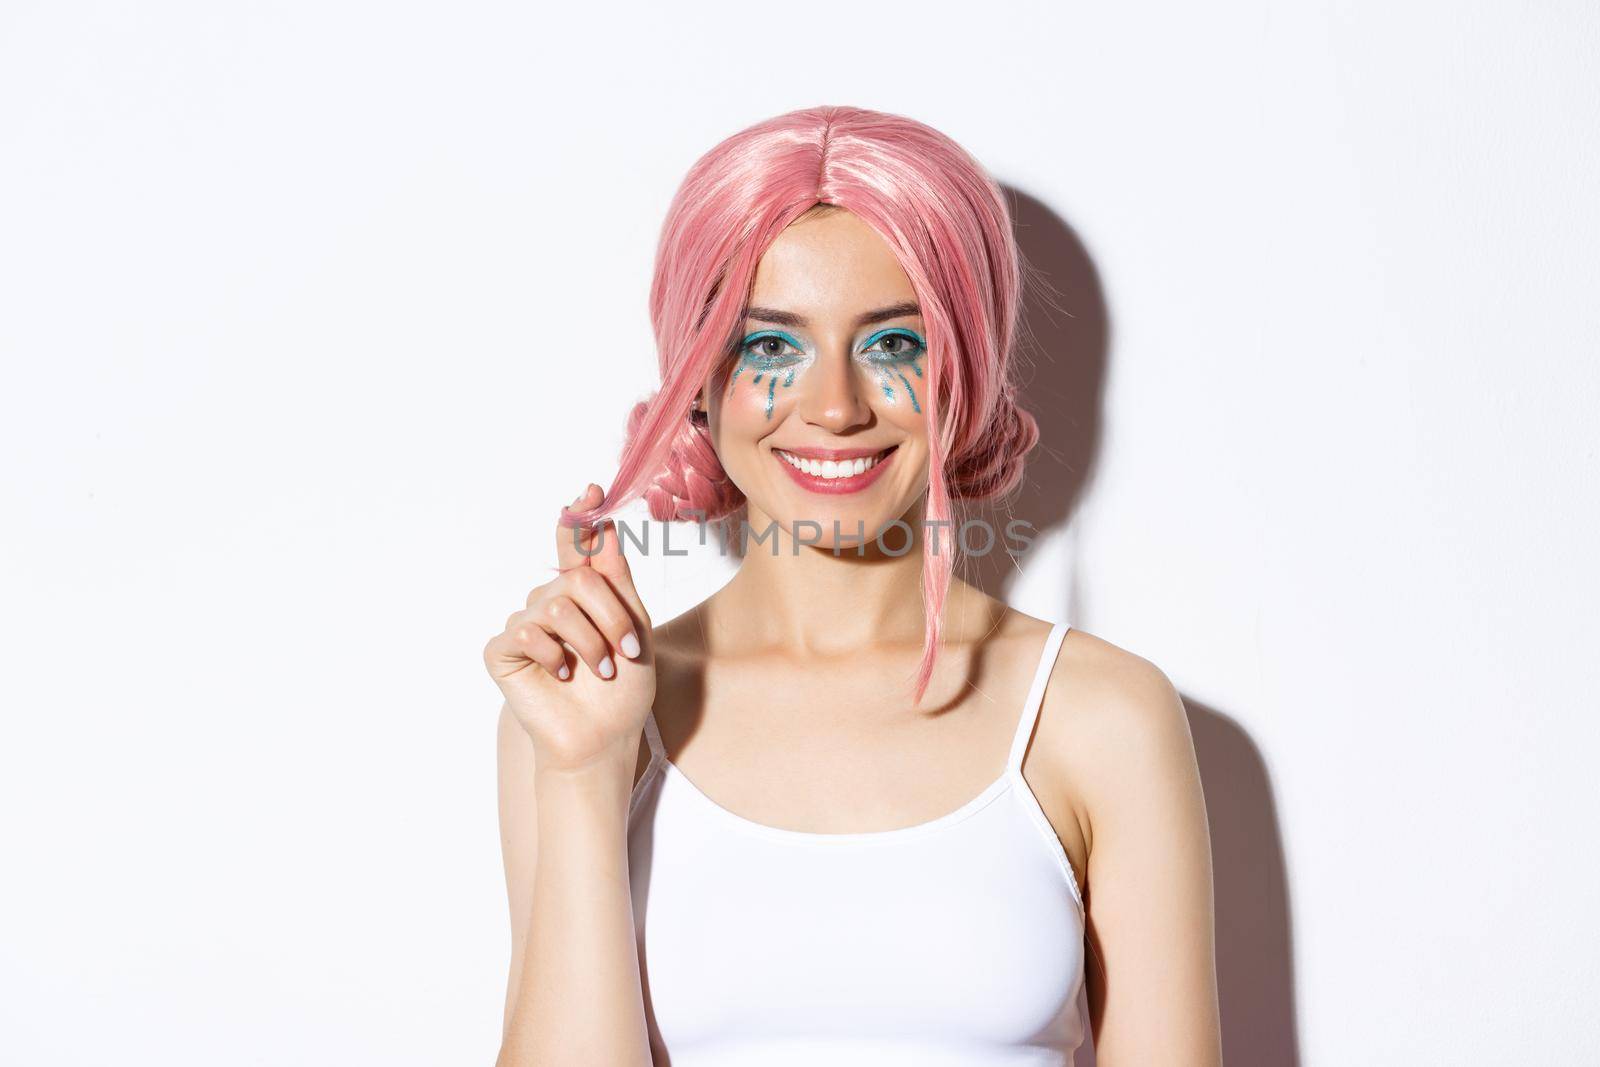 Close-up of beautiful smiling woman in pink wig, celebrating holiday, looking happy at camera, standing over white background.